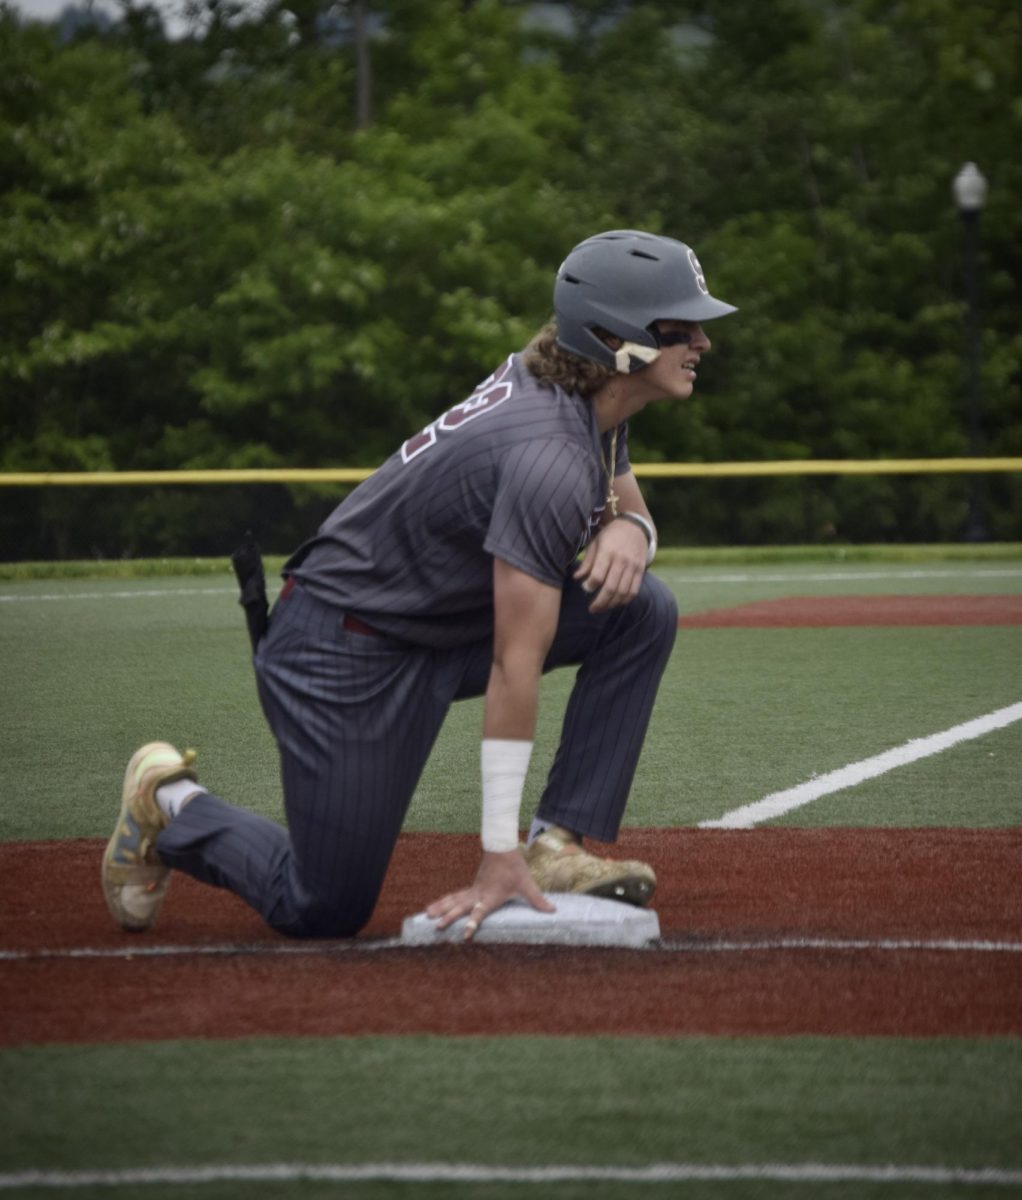 Junior Sebastian Rhoades climbs to one knee after sliding into third base in the first inning.